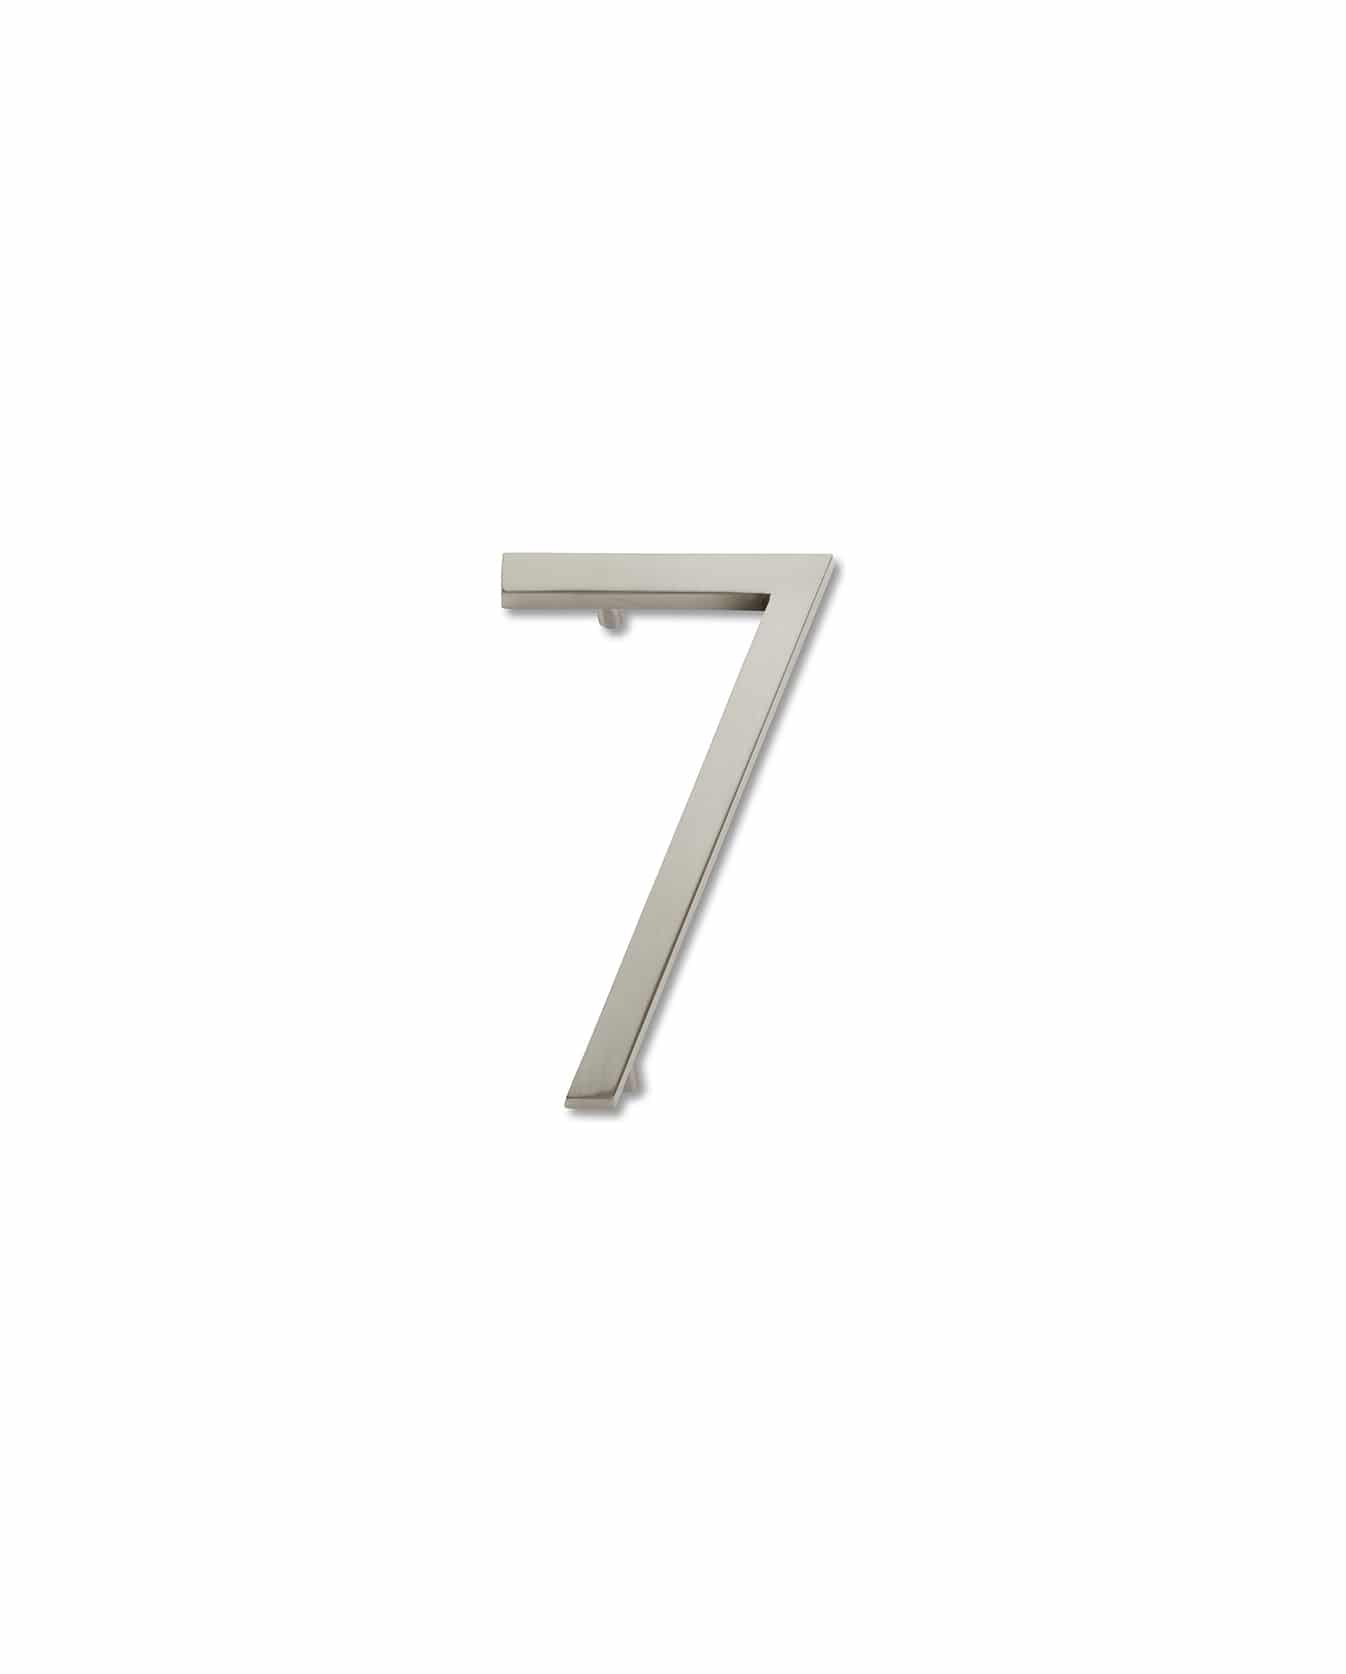 house address signs,address plaques,house address plate,house number plaque modern,address sign,house sign modern,modern address sign,house signs numbers and plaques,house number signs,house signs and plaques,address sign plaque,Brushed Nickel house number